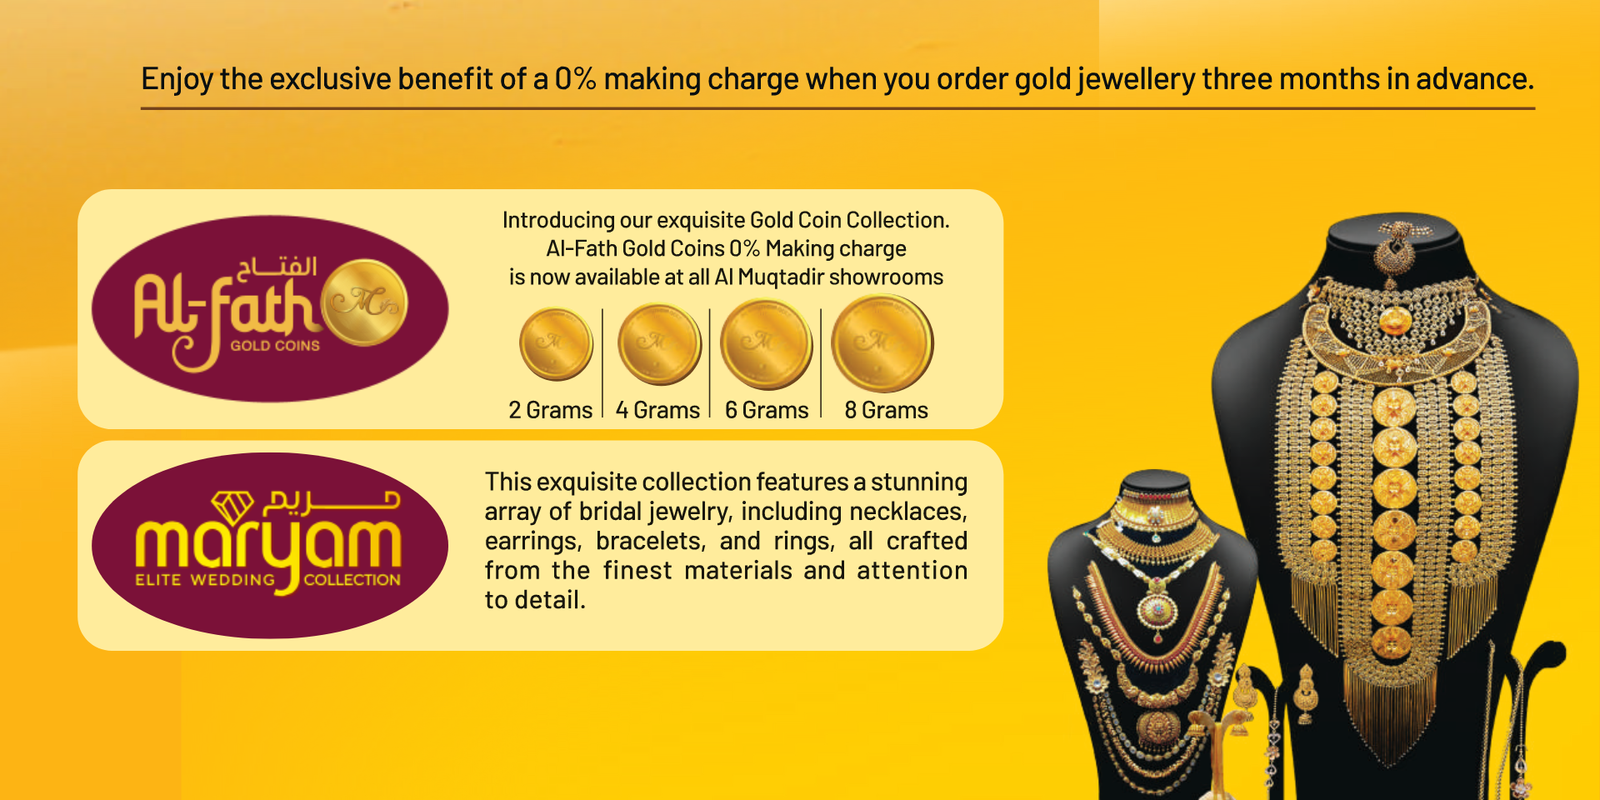 Gold jewellery from India Dubiai